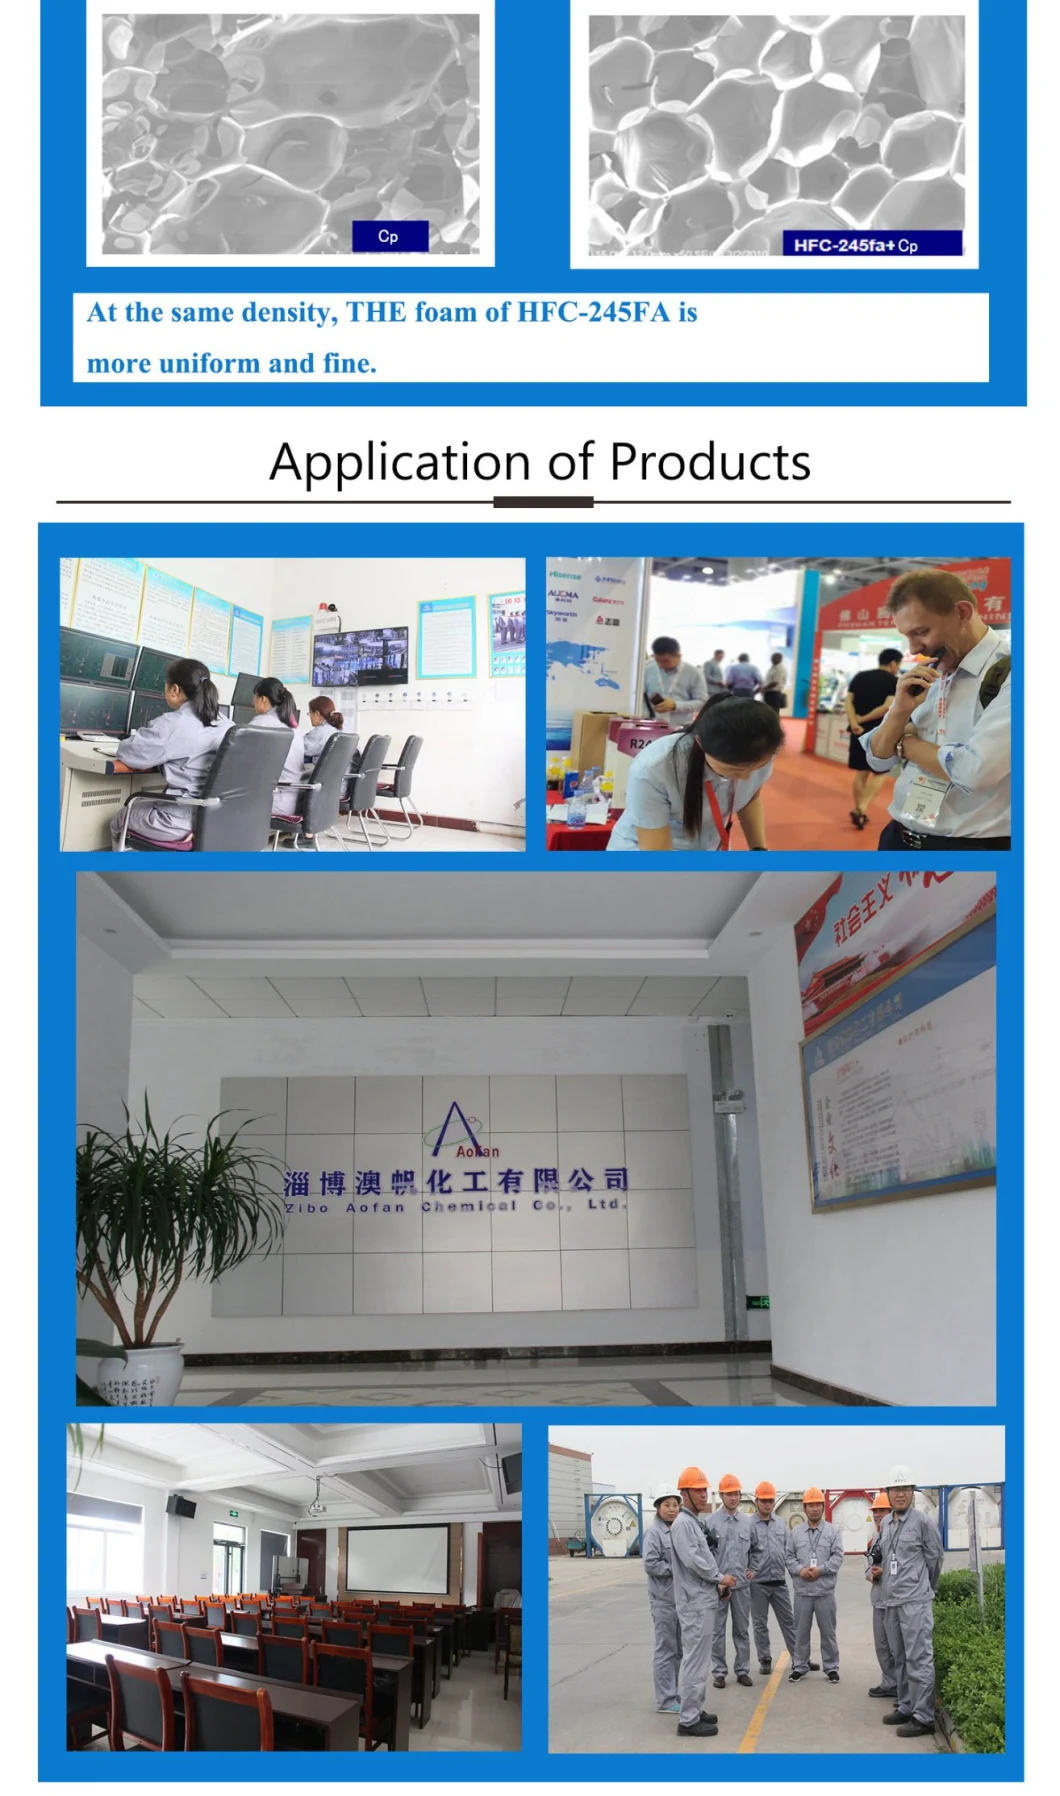 Foaming New Refrigerant Gas Compressed Gas Cylinder Storage Refrigerated Air Conditioner Hfc-245fa